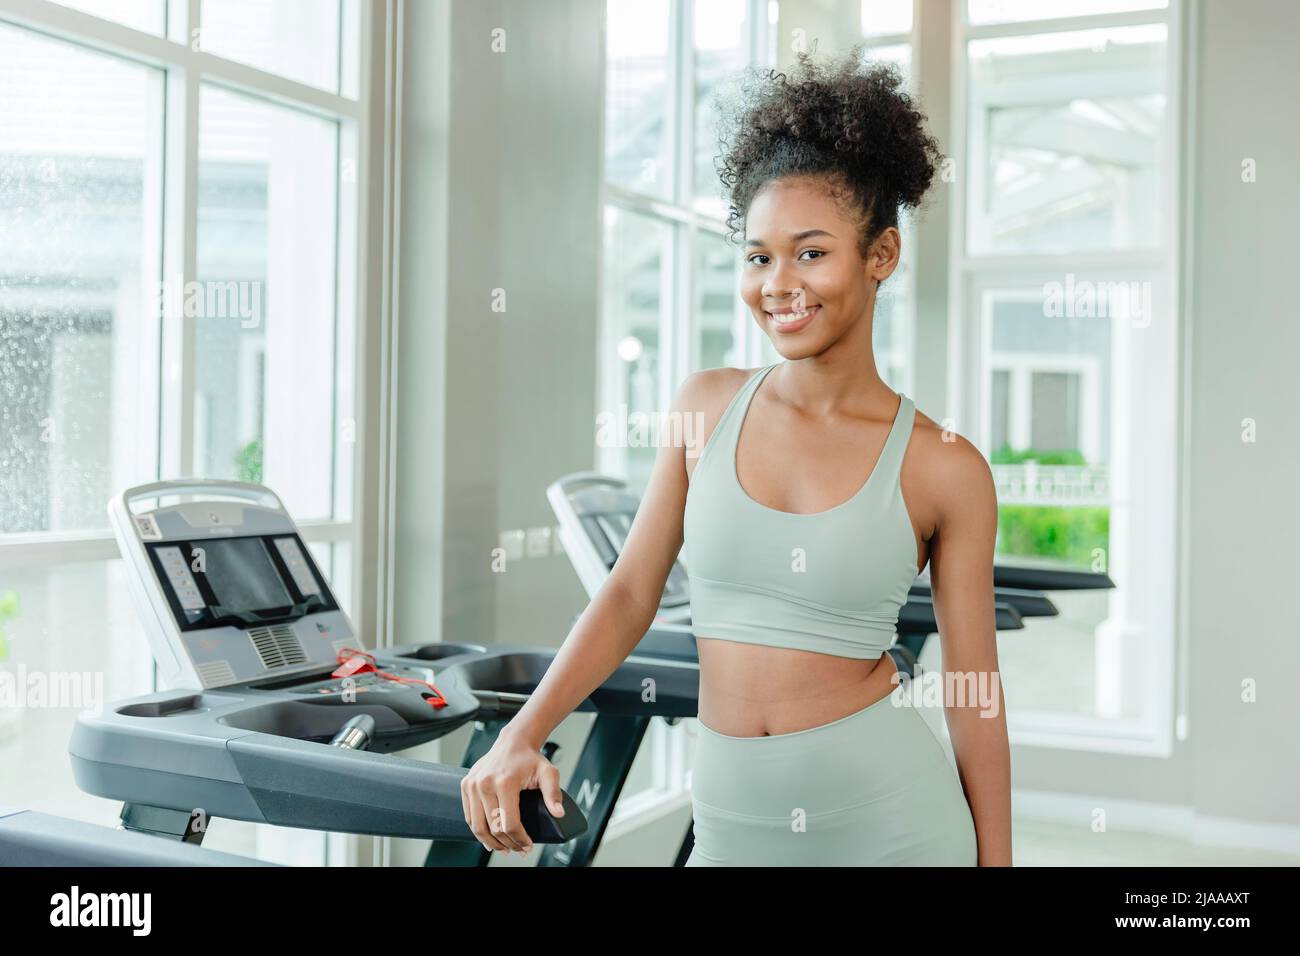 portrait healthy young teen black woman in sport club fitness happy smile.healthcare girl workout exercise. Stock Photo